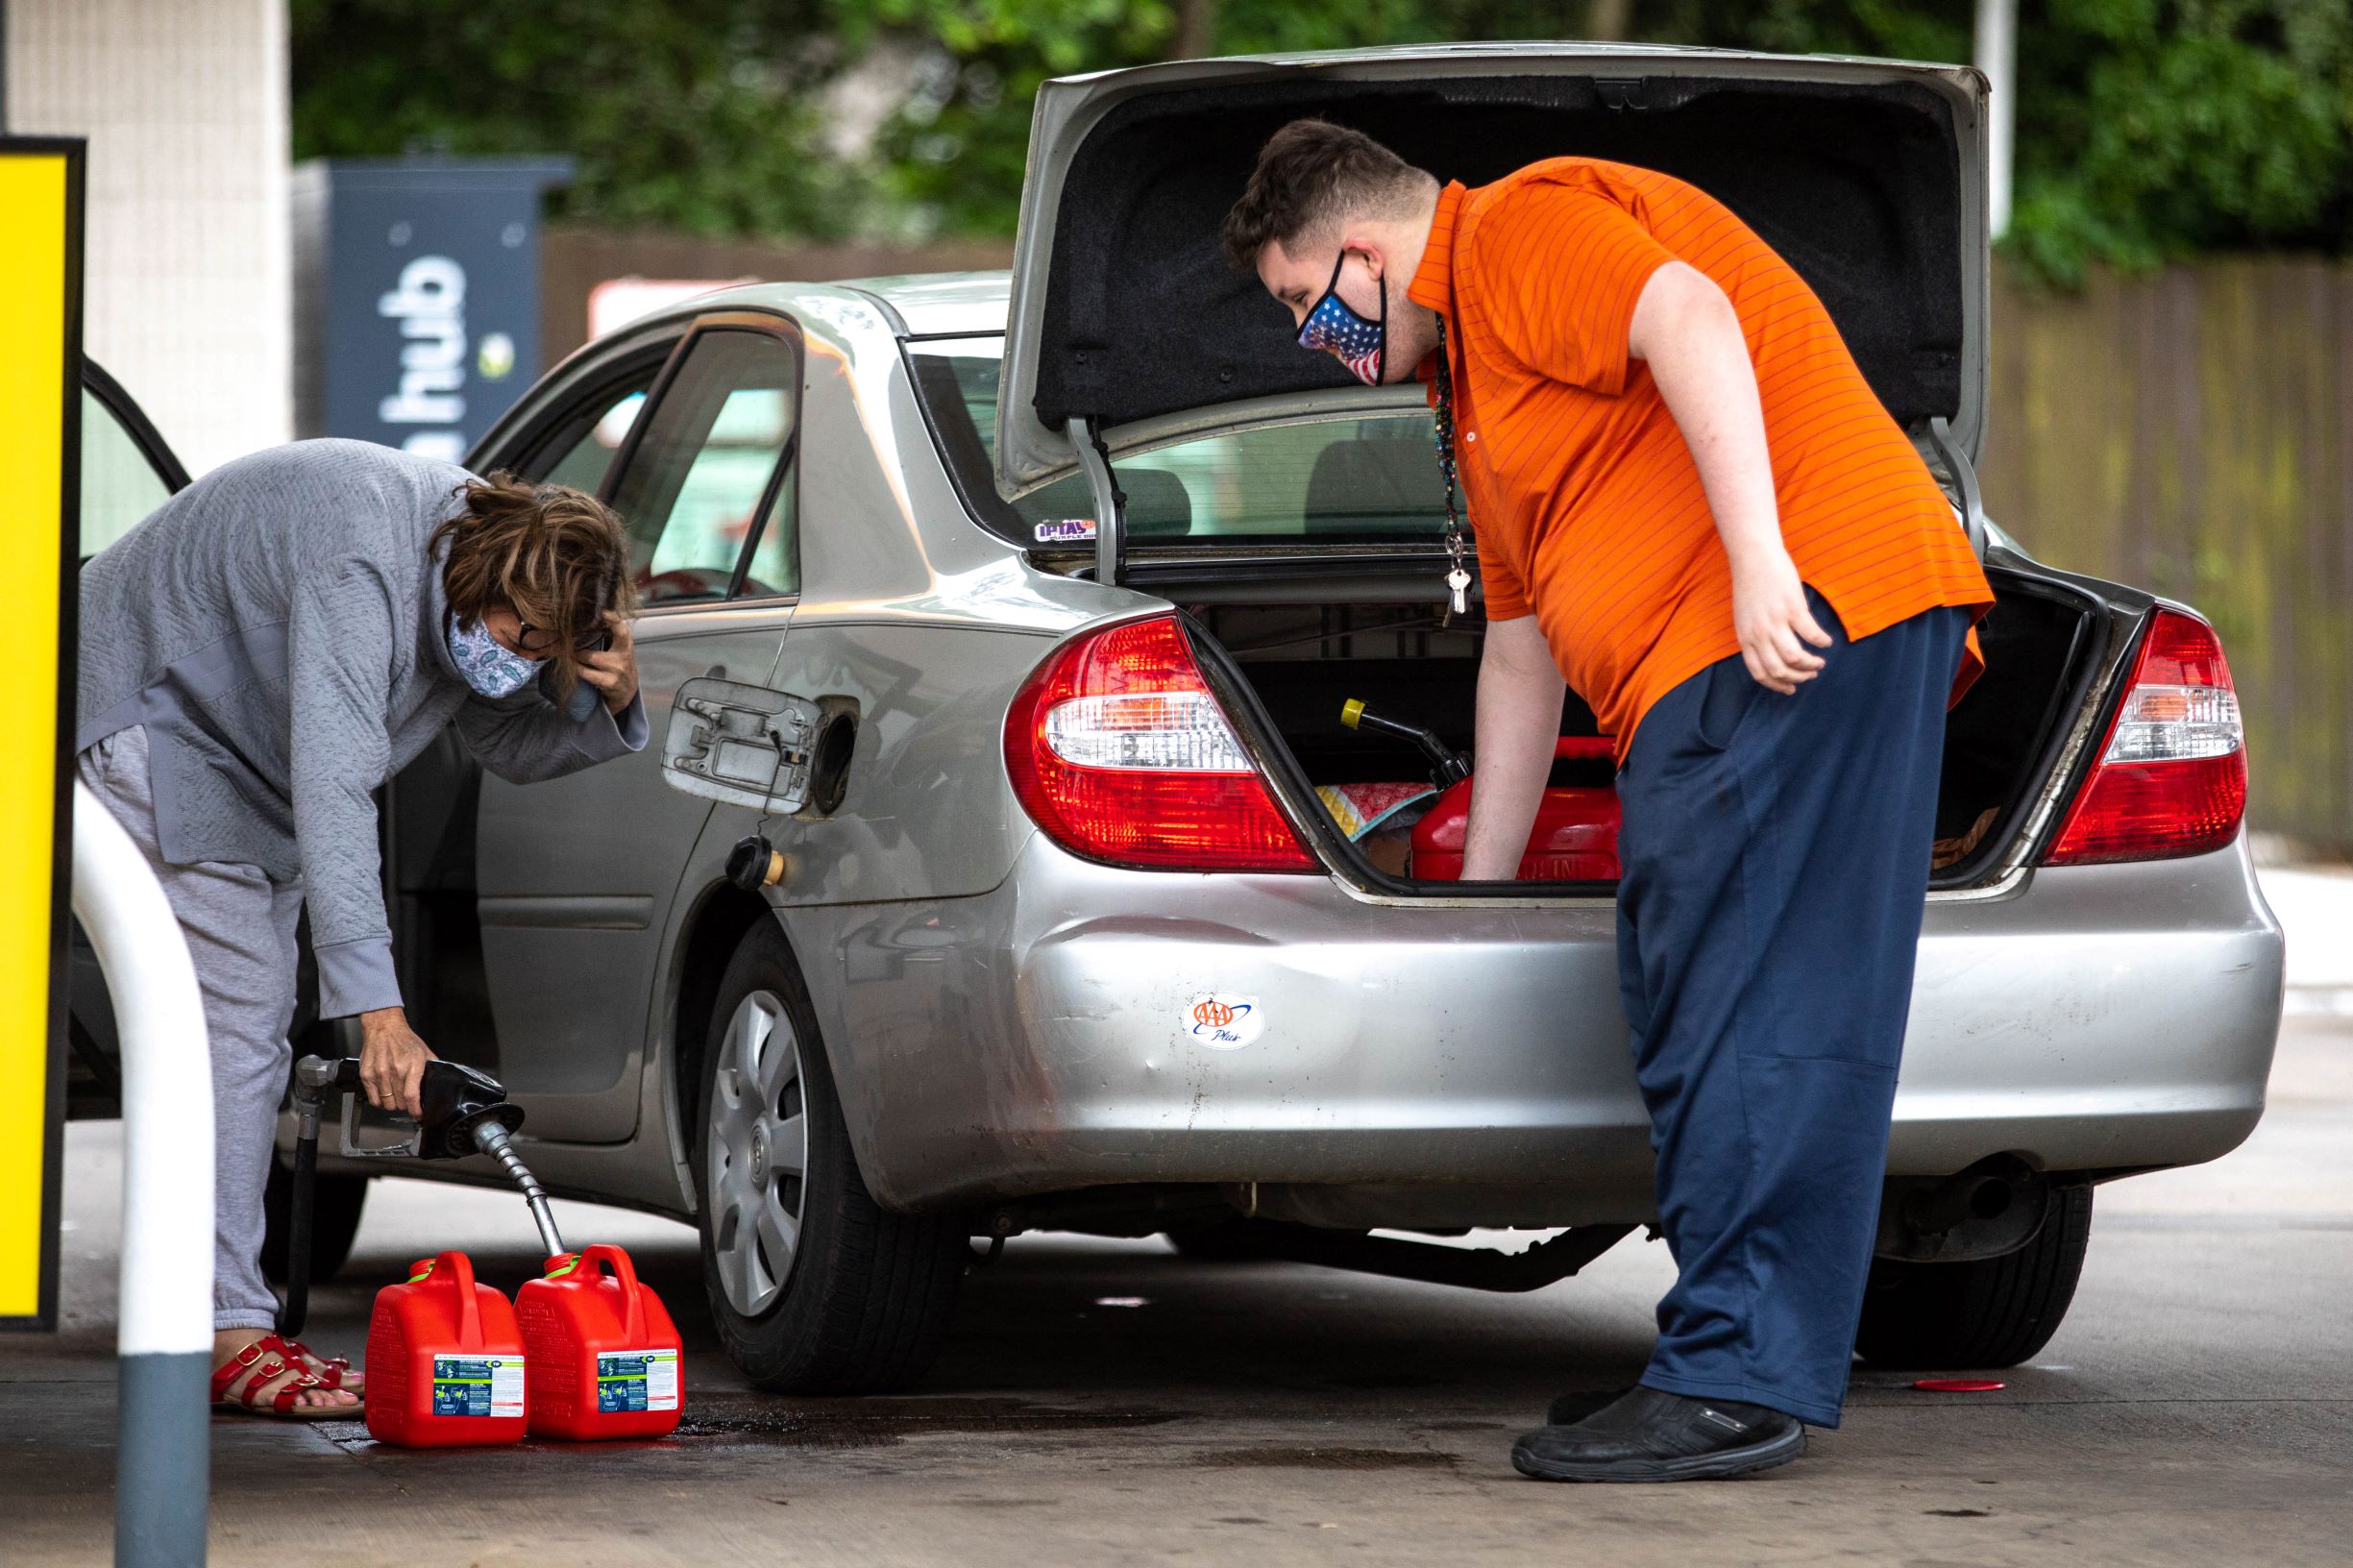 Two motorists fill up multiple gas cans and put them in their car